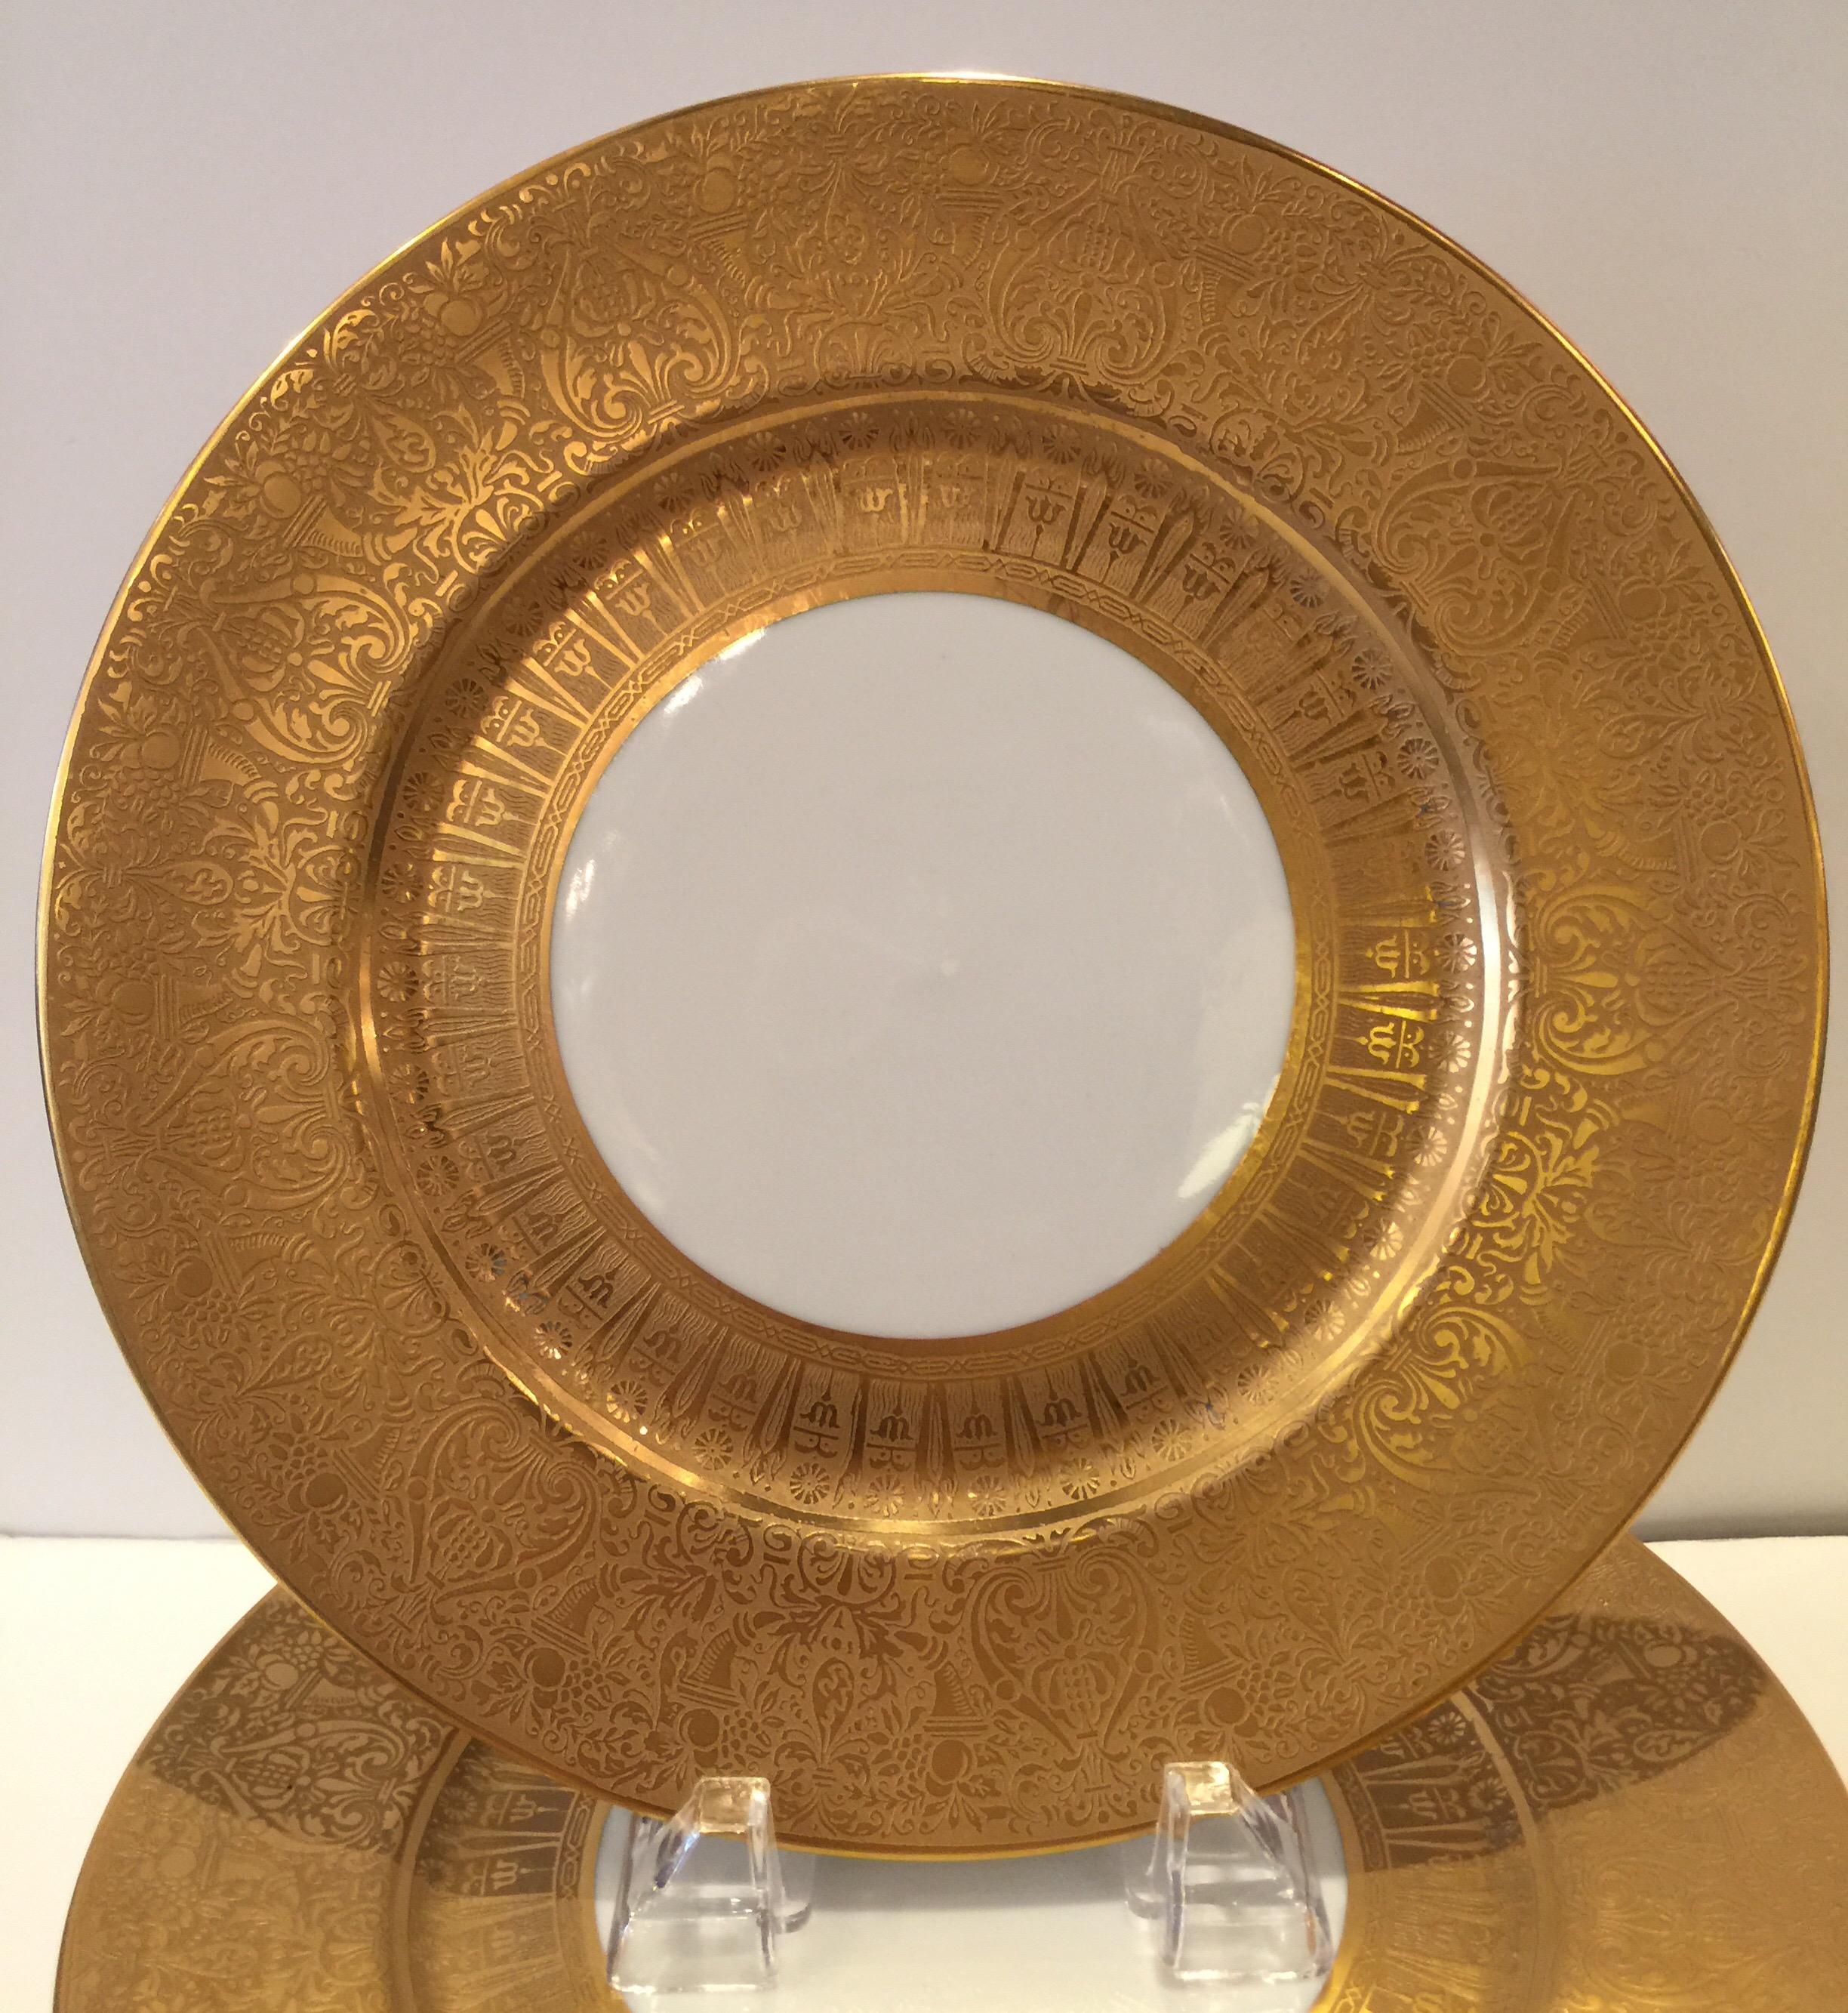 Set of eight thick gold embossed dinner/service plates Heinrich & Co., Bavaria.